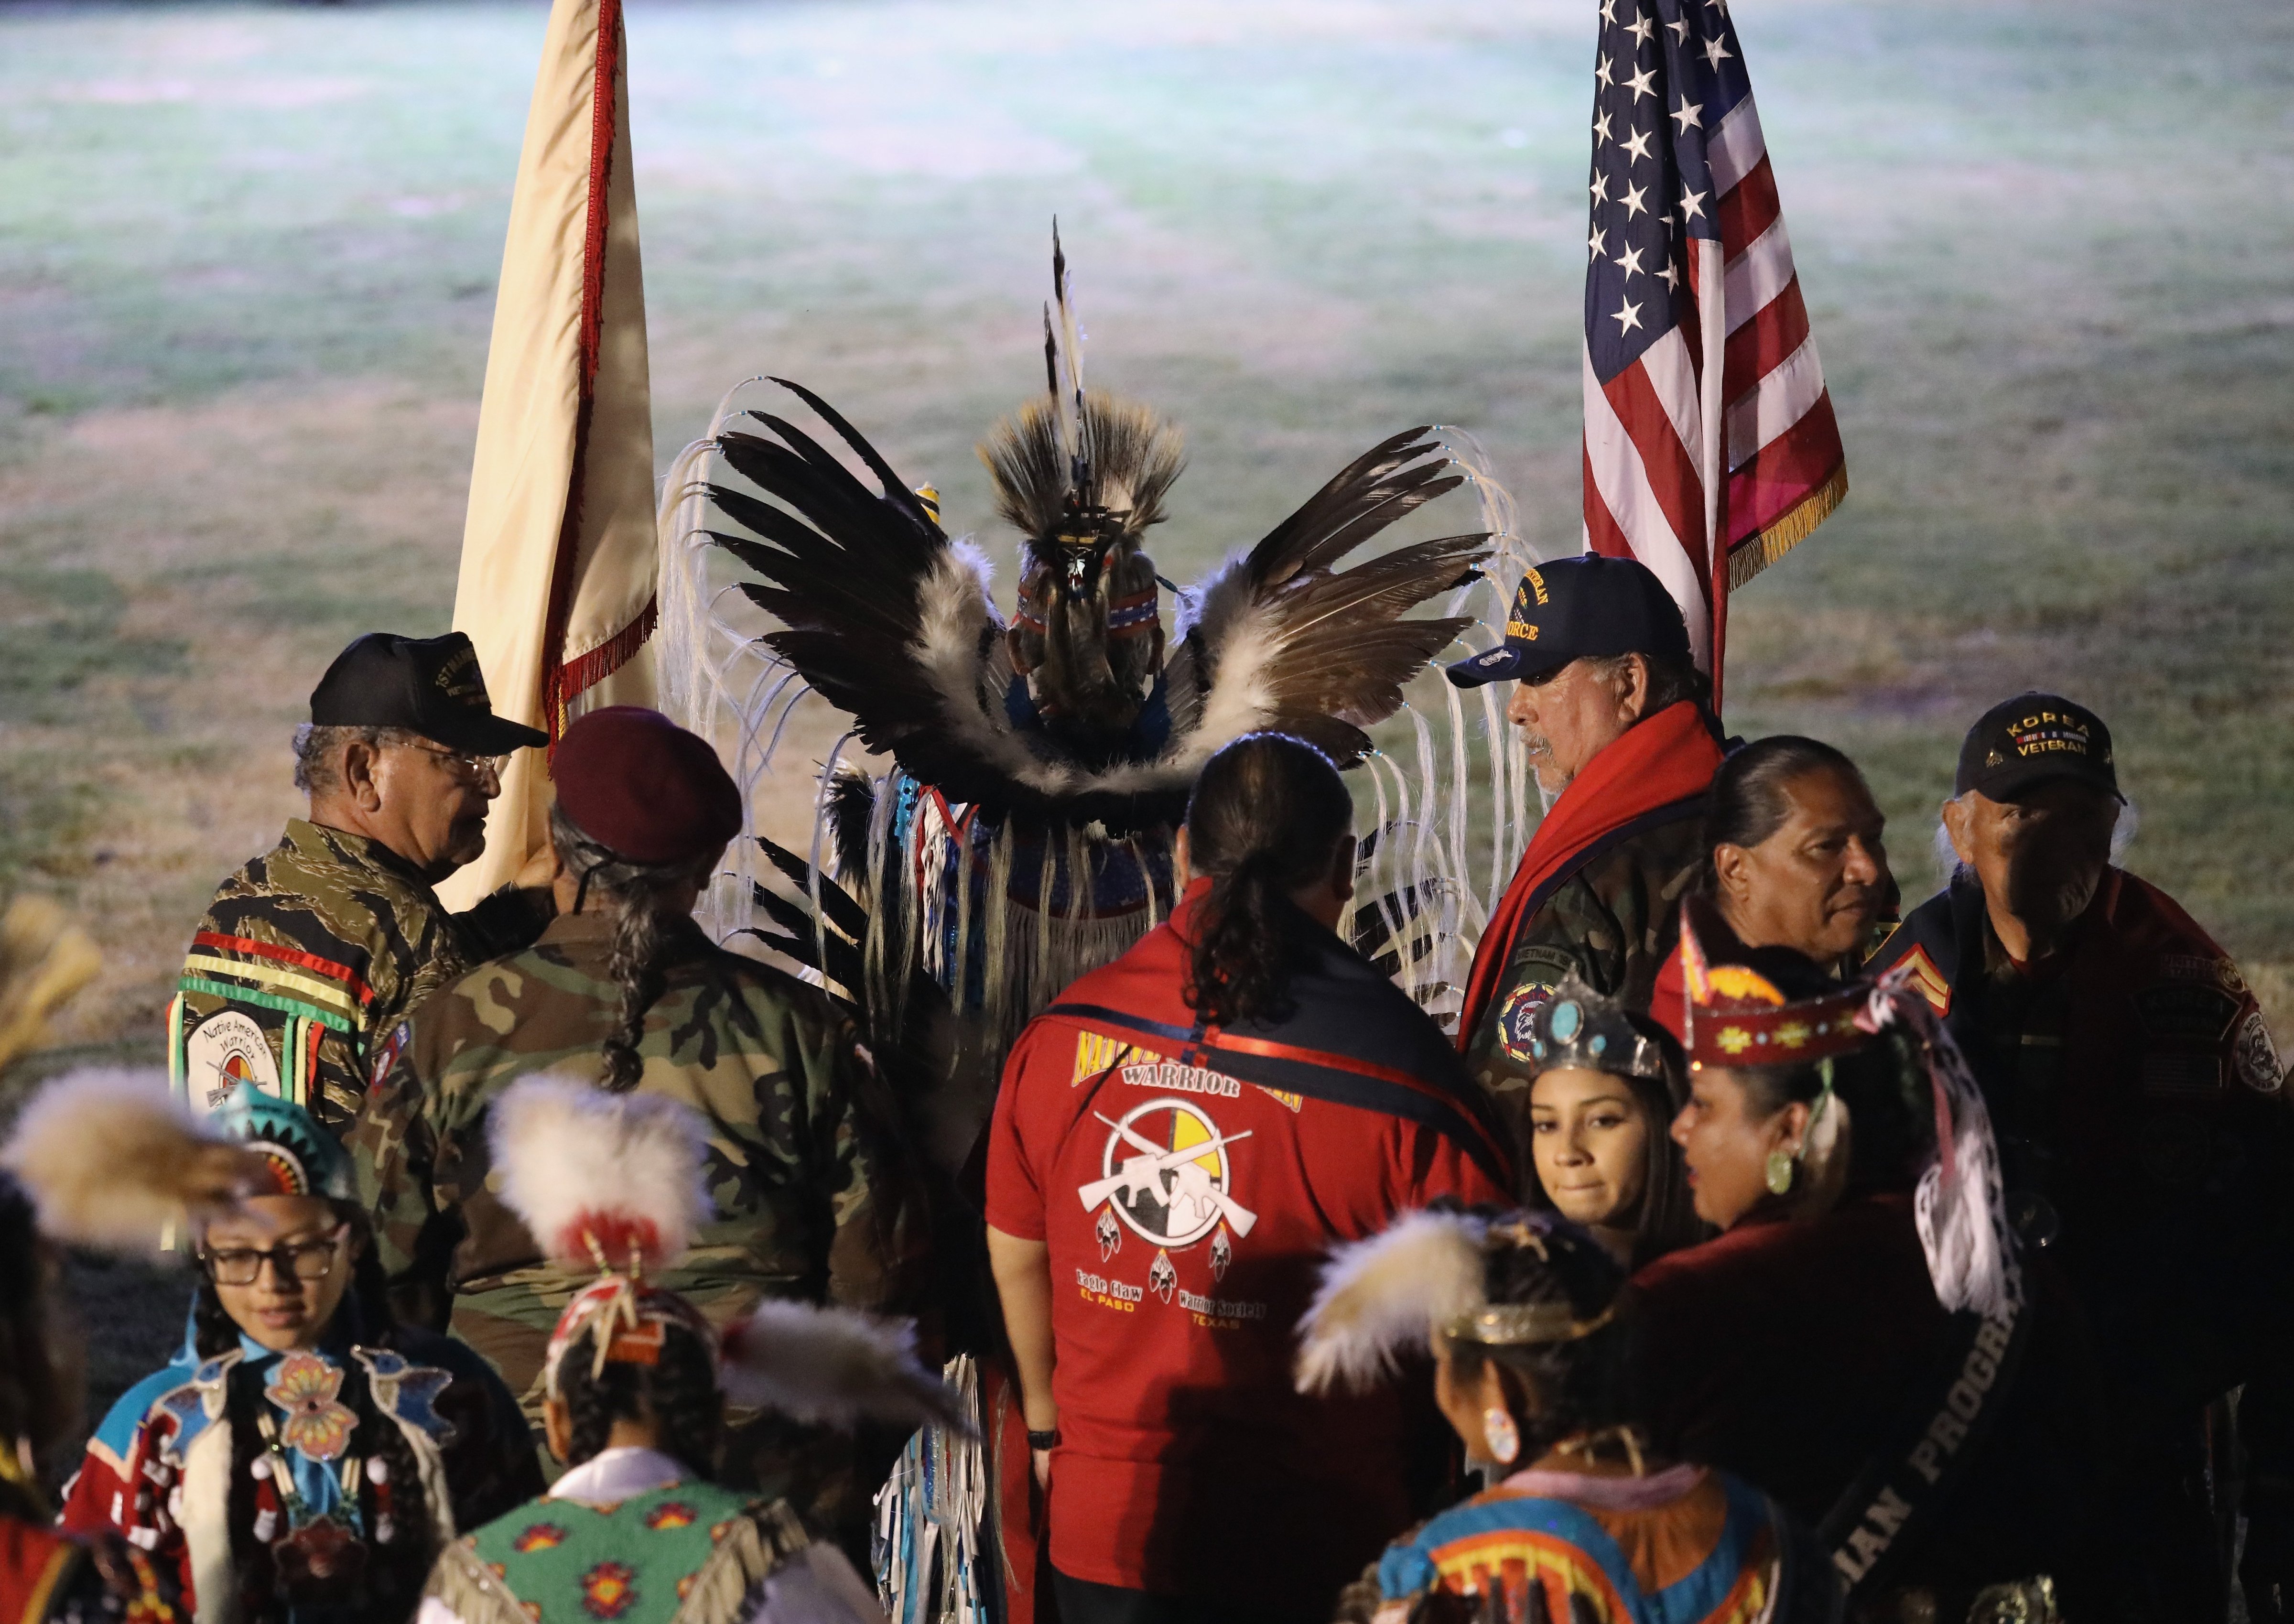 Native American veterans carry U.S. and tribal flags before entering the "Rocking the Rez" Pow Wow on Oct. 1, 2016 in Ysleta del Sur Pueblo, Texas, expressing support for protesters that have blocked construction of the Dakota Access Pipeline. (John Moore—Getty Images)